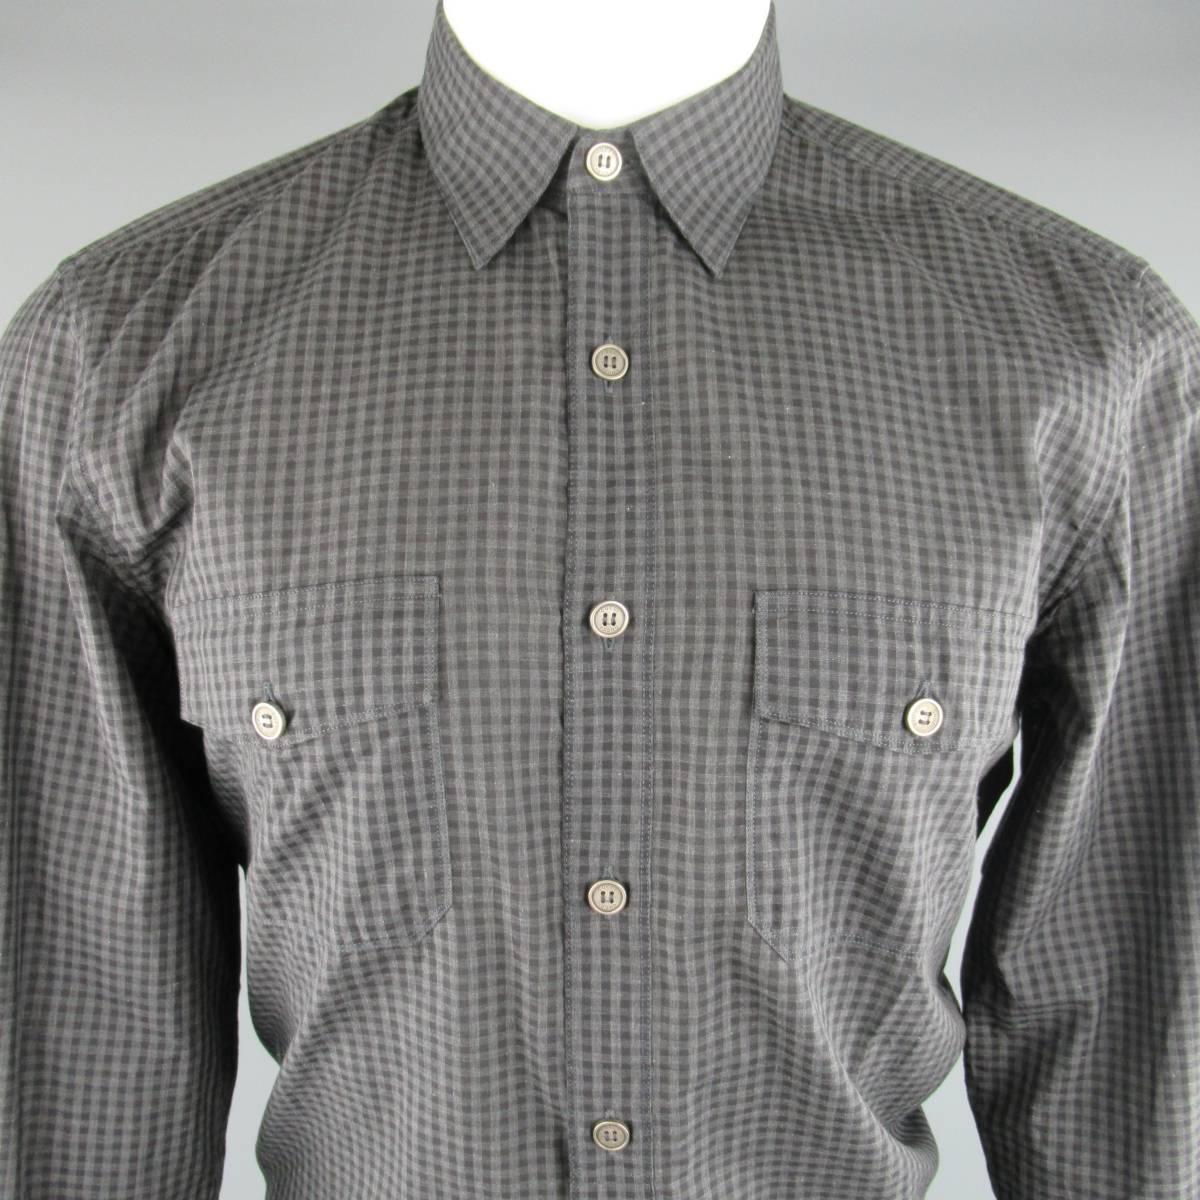 Fitted  GUCCI shirt comes in a charcoal gray and black gingham checkered plaid and features military style patch flap pockets, smoke silver tone buttons, and half hidden placket front. Made in Italy.
 
Excellent Pre-Owned Condition.
Marked: 39 /